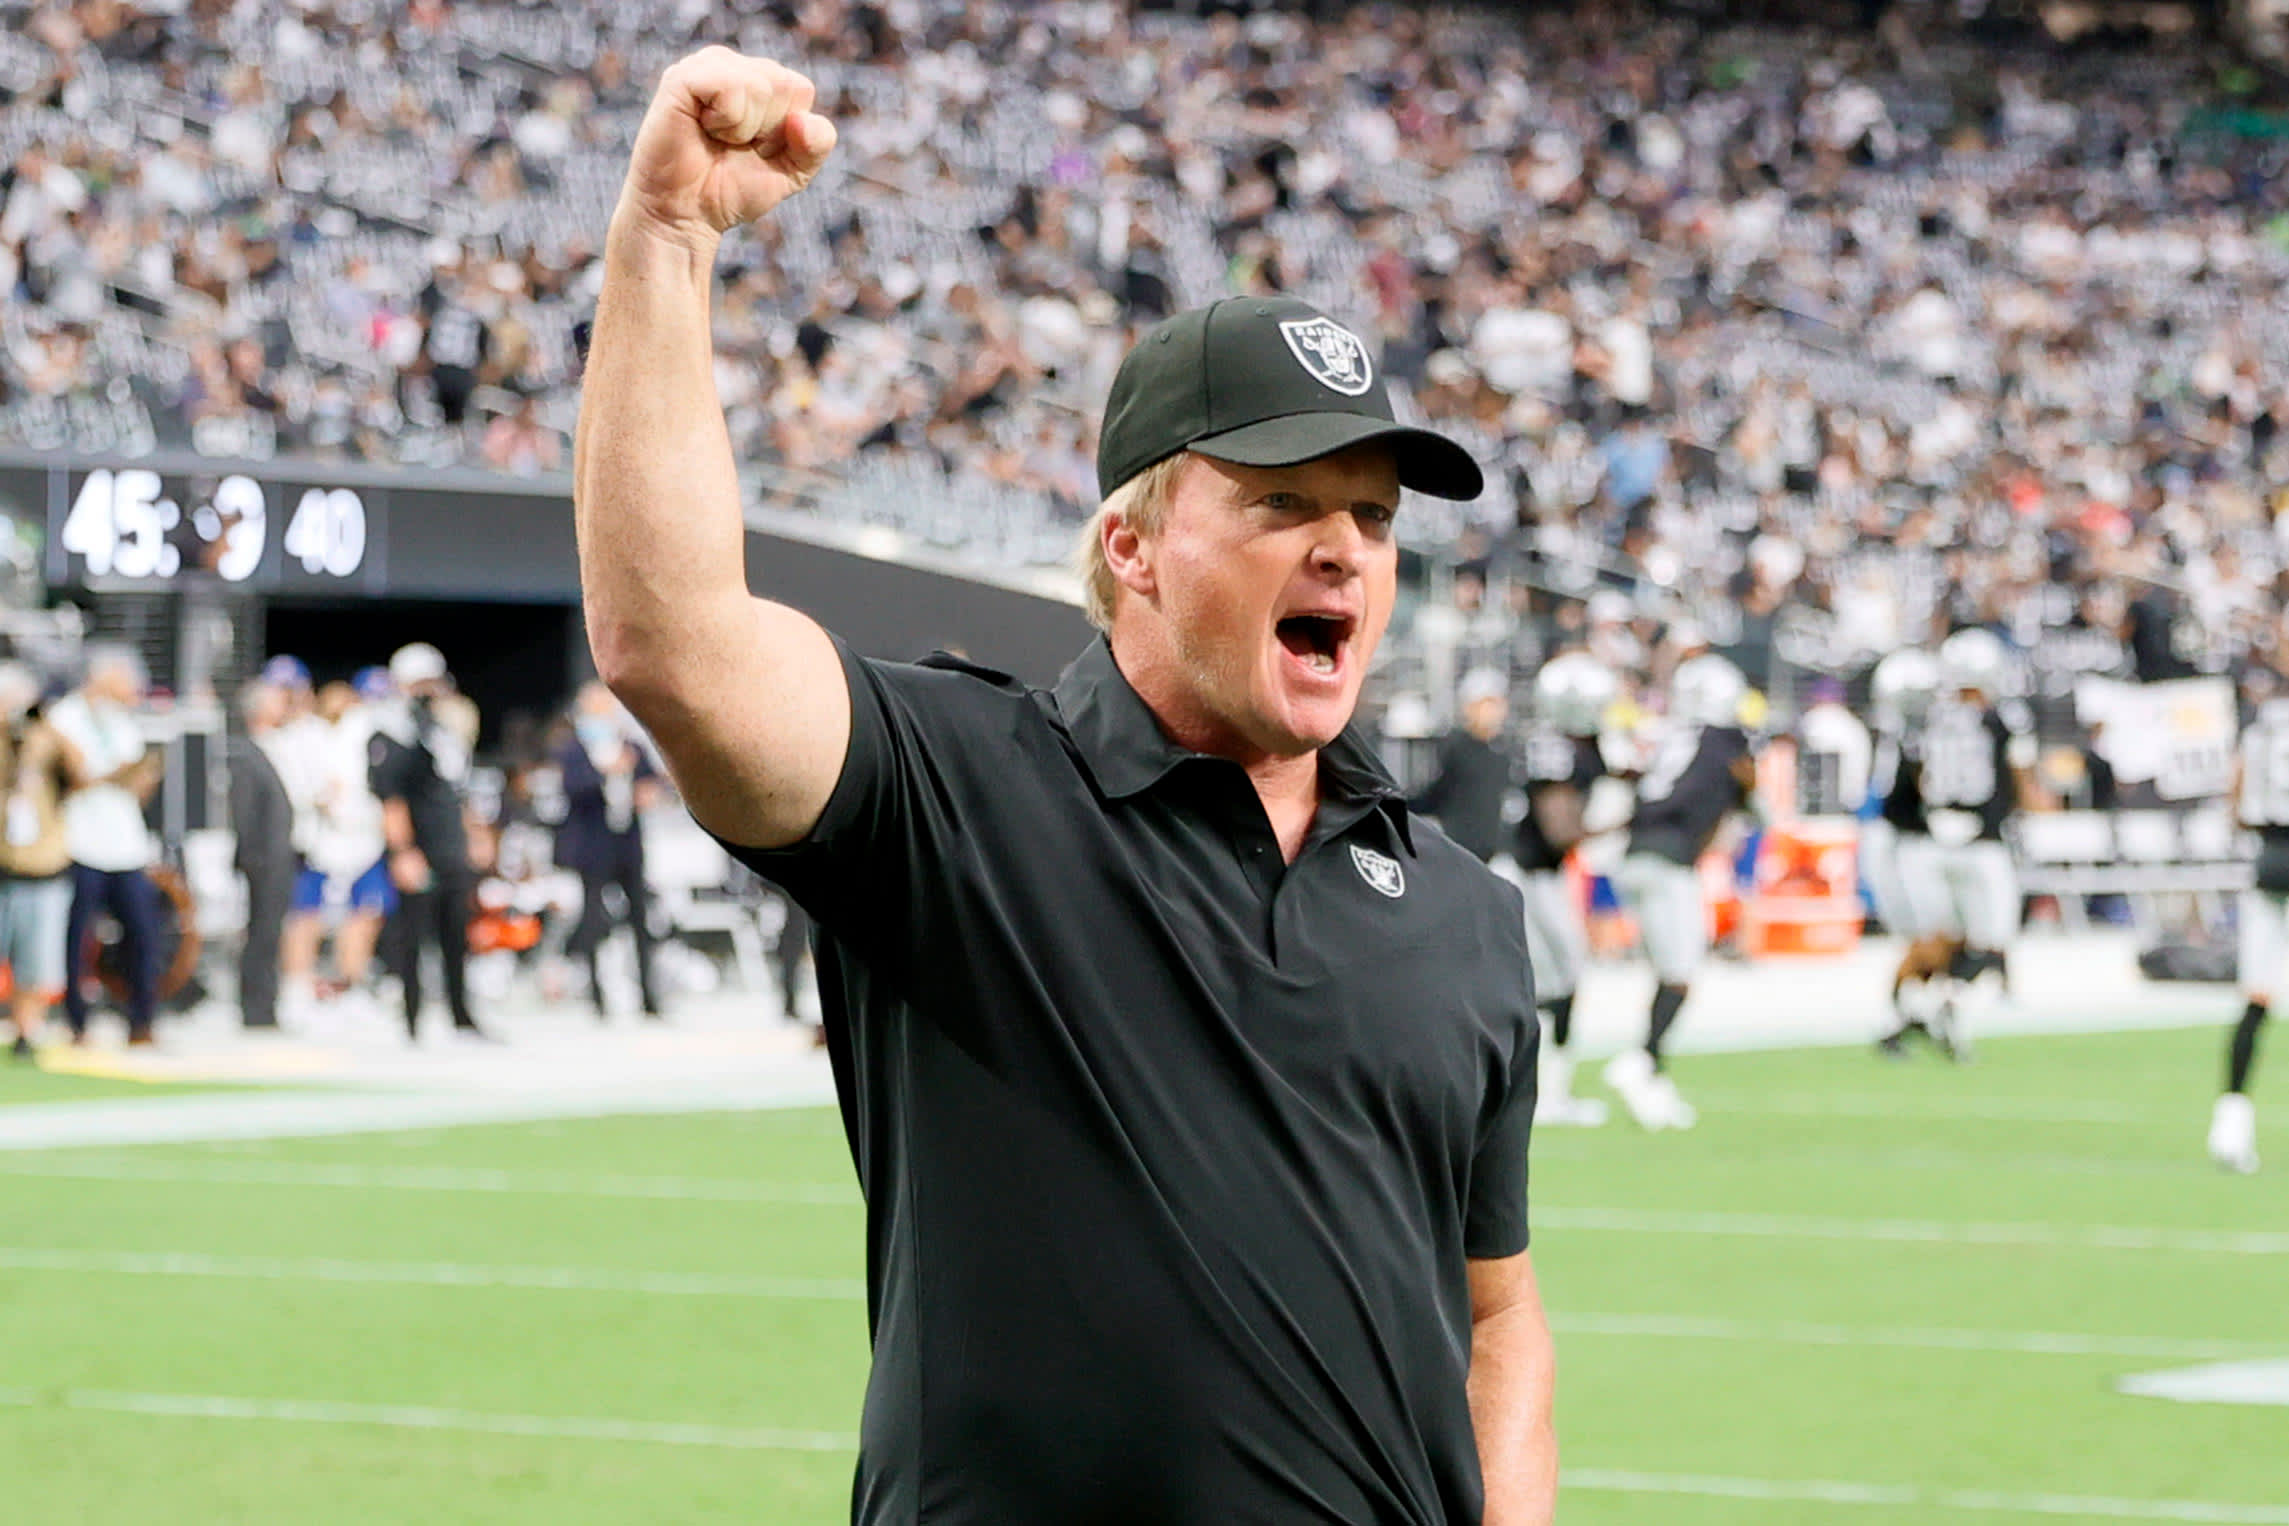 Former Head coach Jon Gruden Of The Las Vegas Raiders Reacts To The Crowd During Warmups Before A Preseason Game Against The Seattle Seahawks 